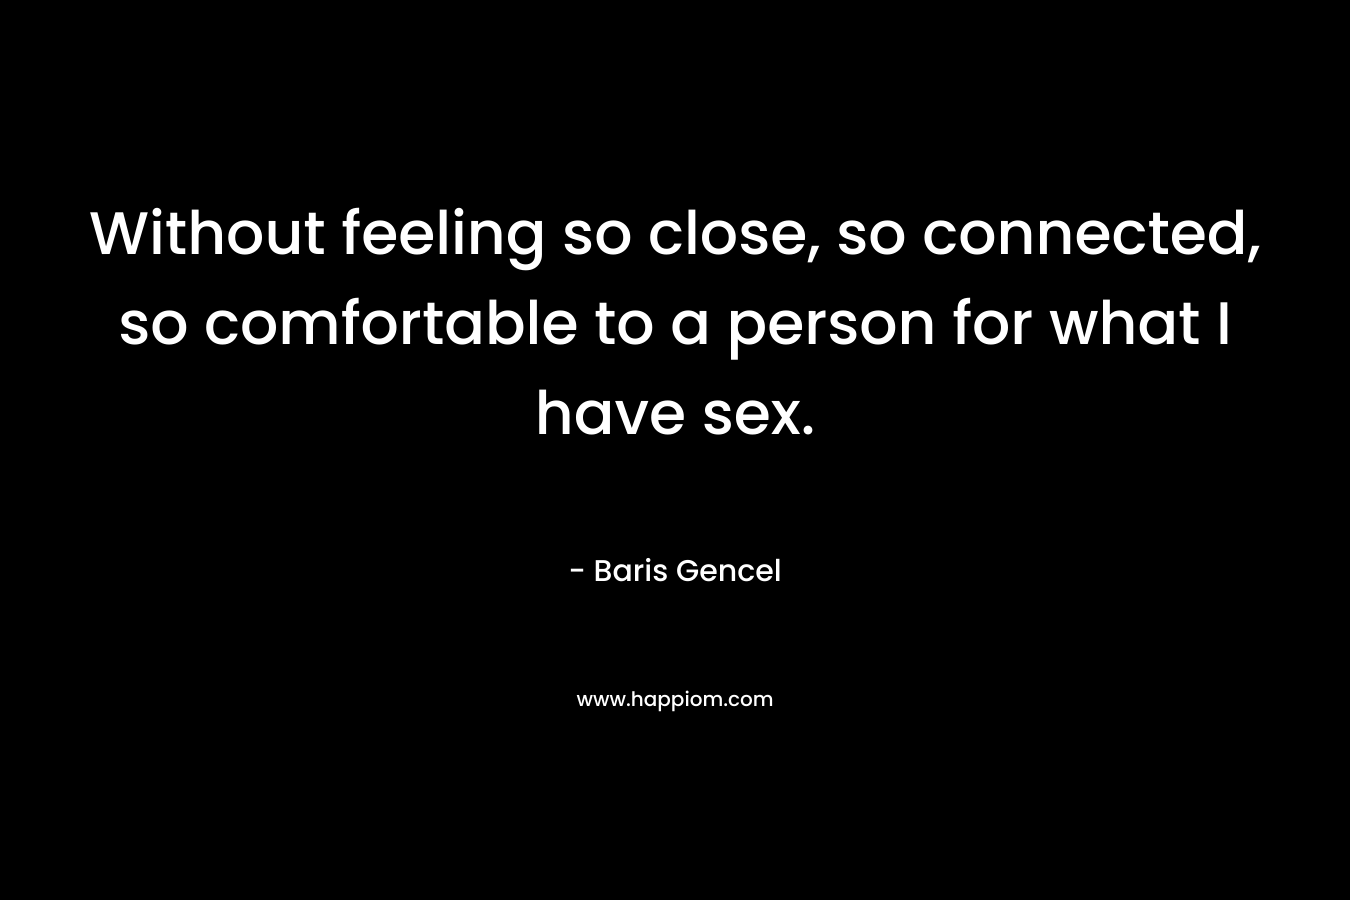 Without feeling so close, so connected, so comfortable to a person for what I have sex. – Baris Gencel